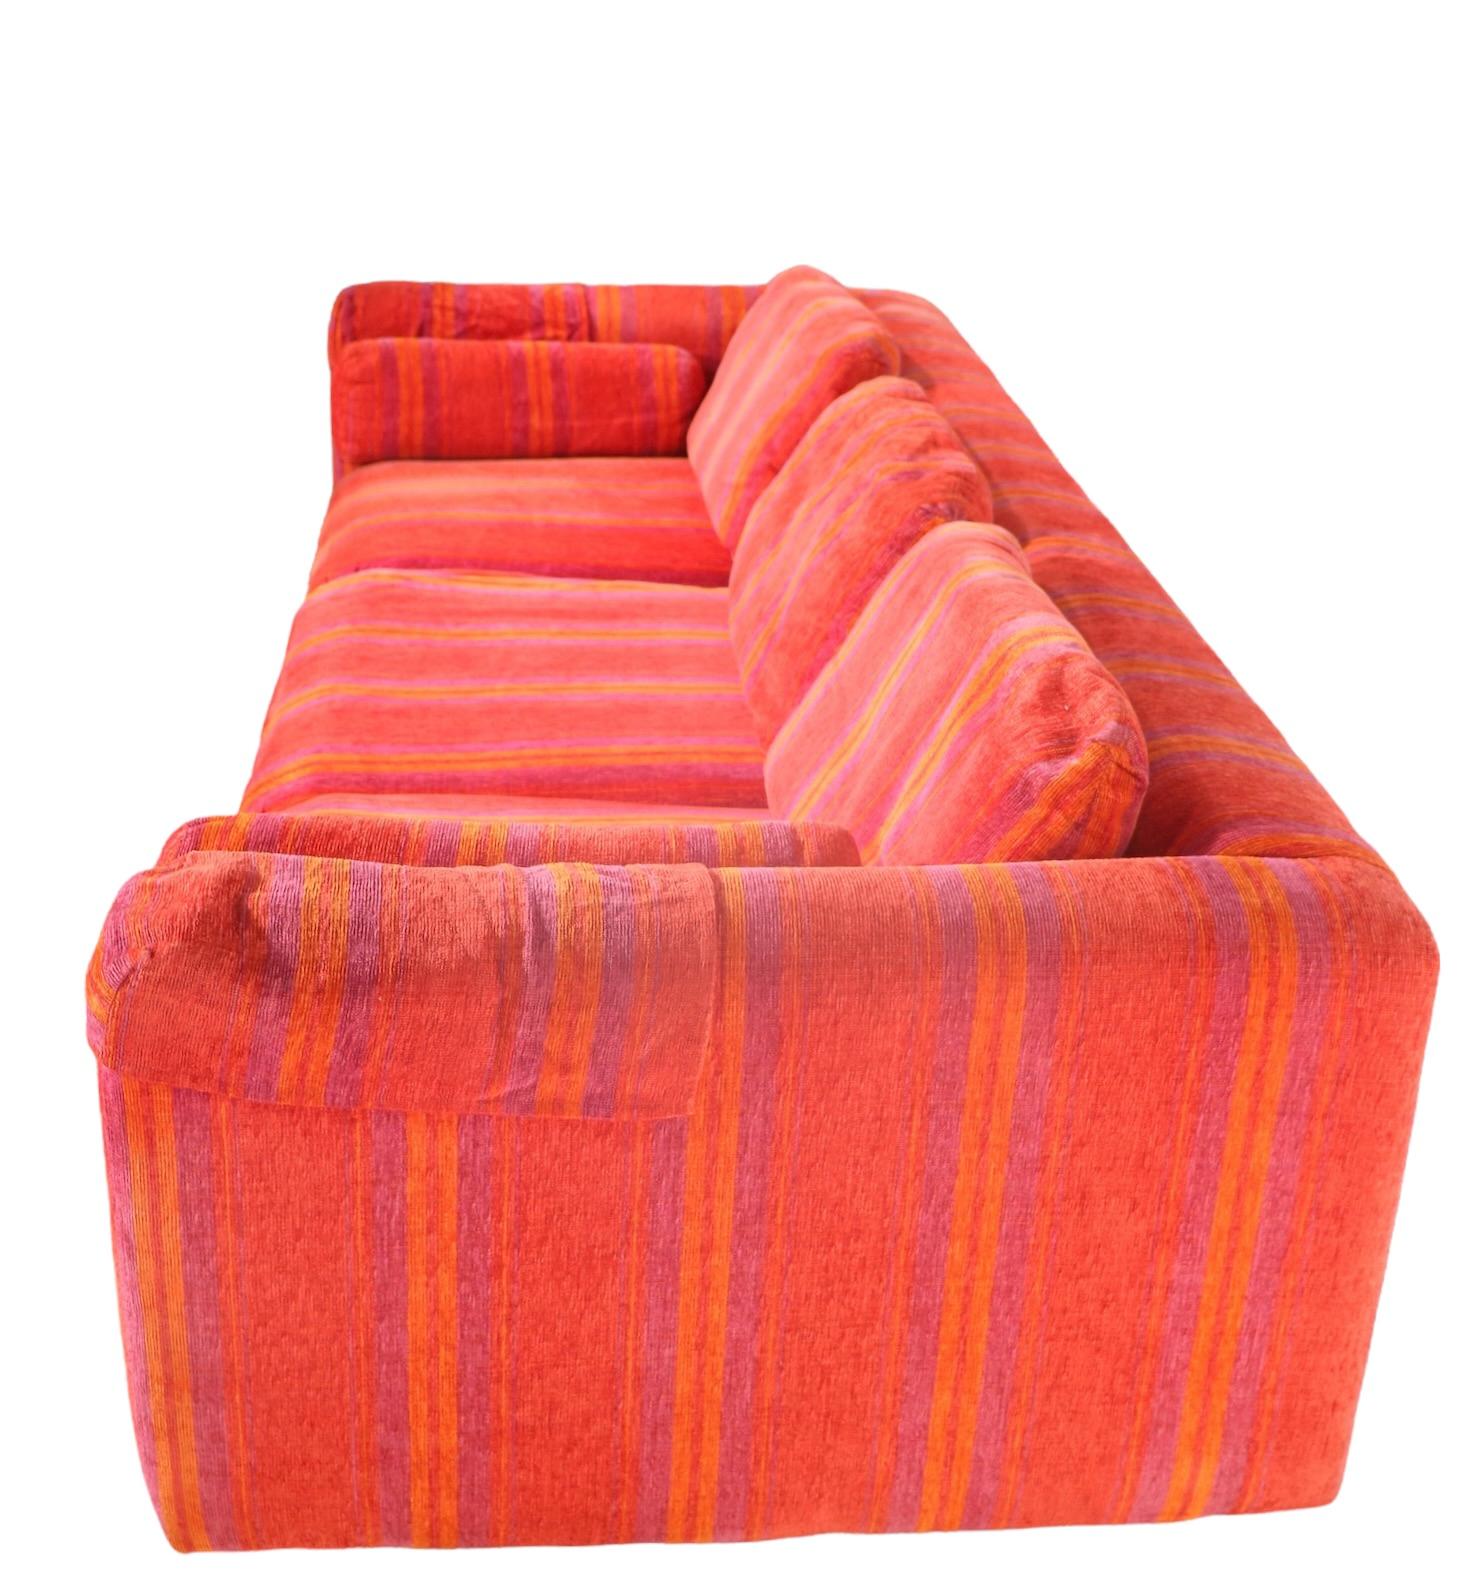 Postmodern Selig Imperial Sofa Possibly by Milo Baughman  For Sale 2